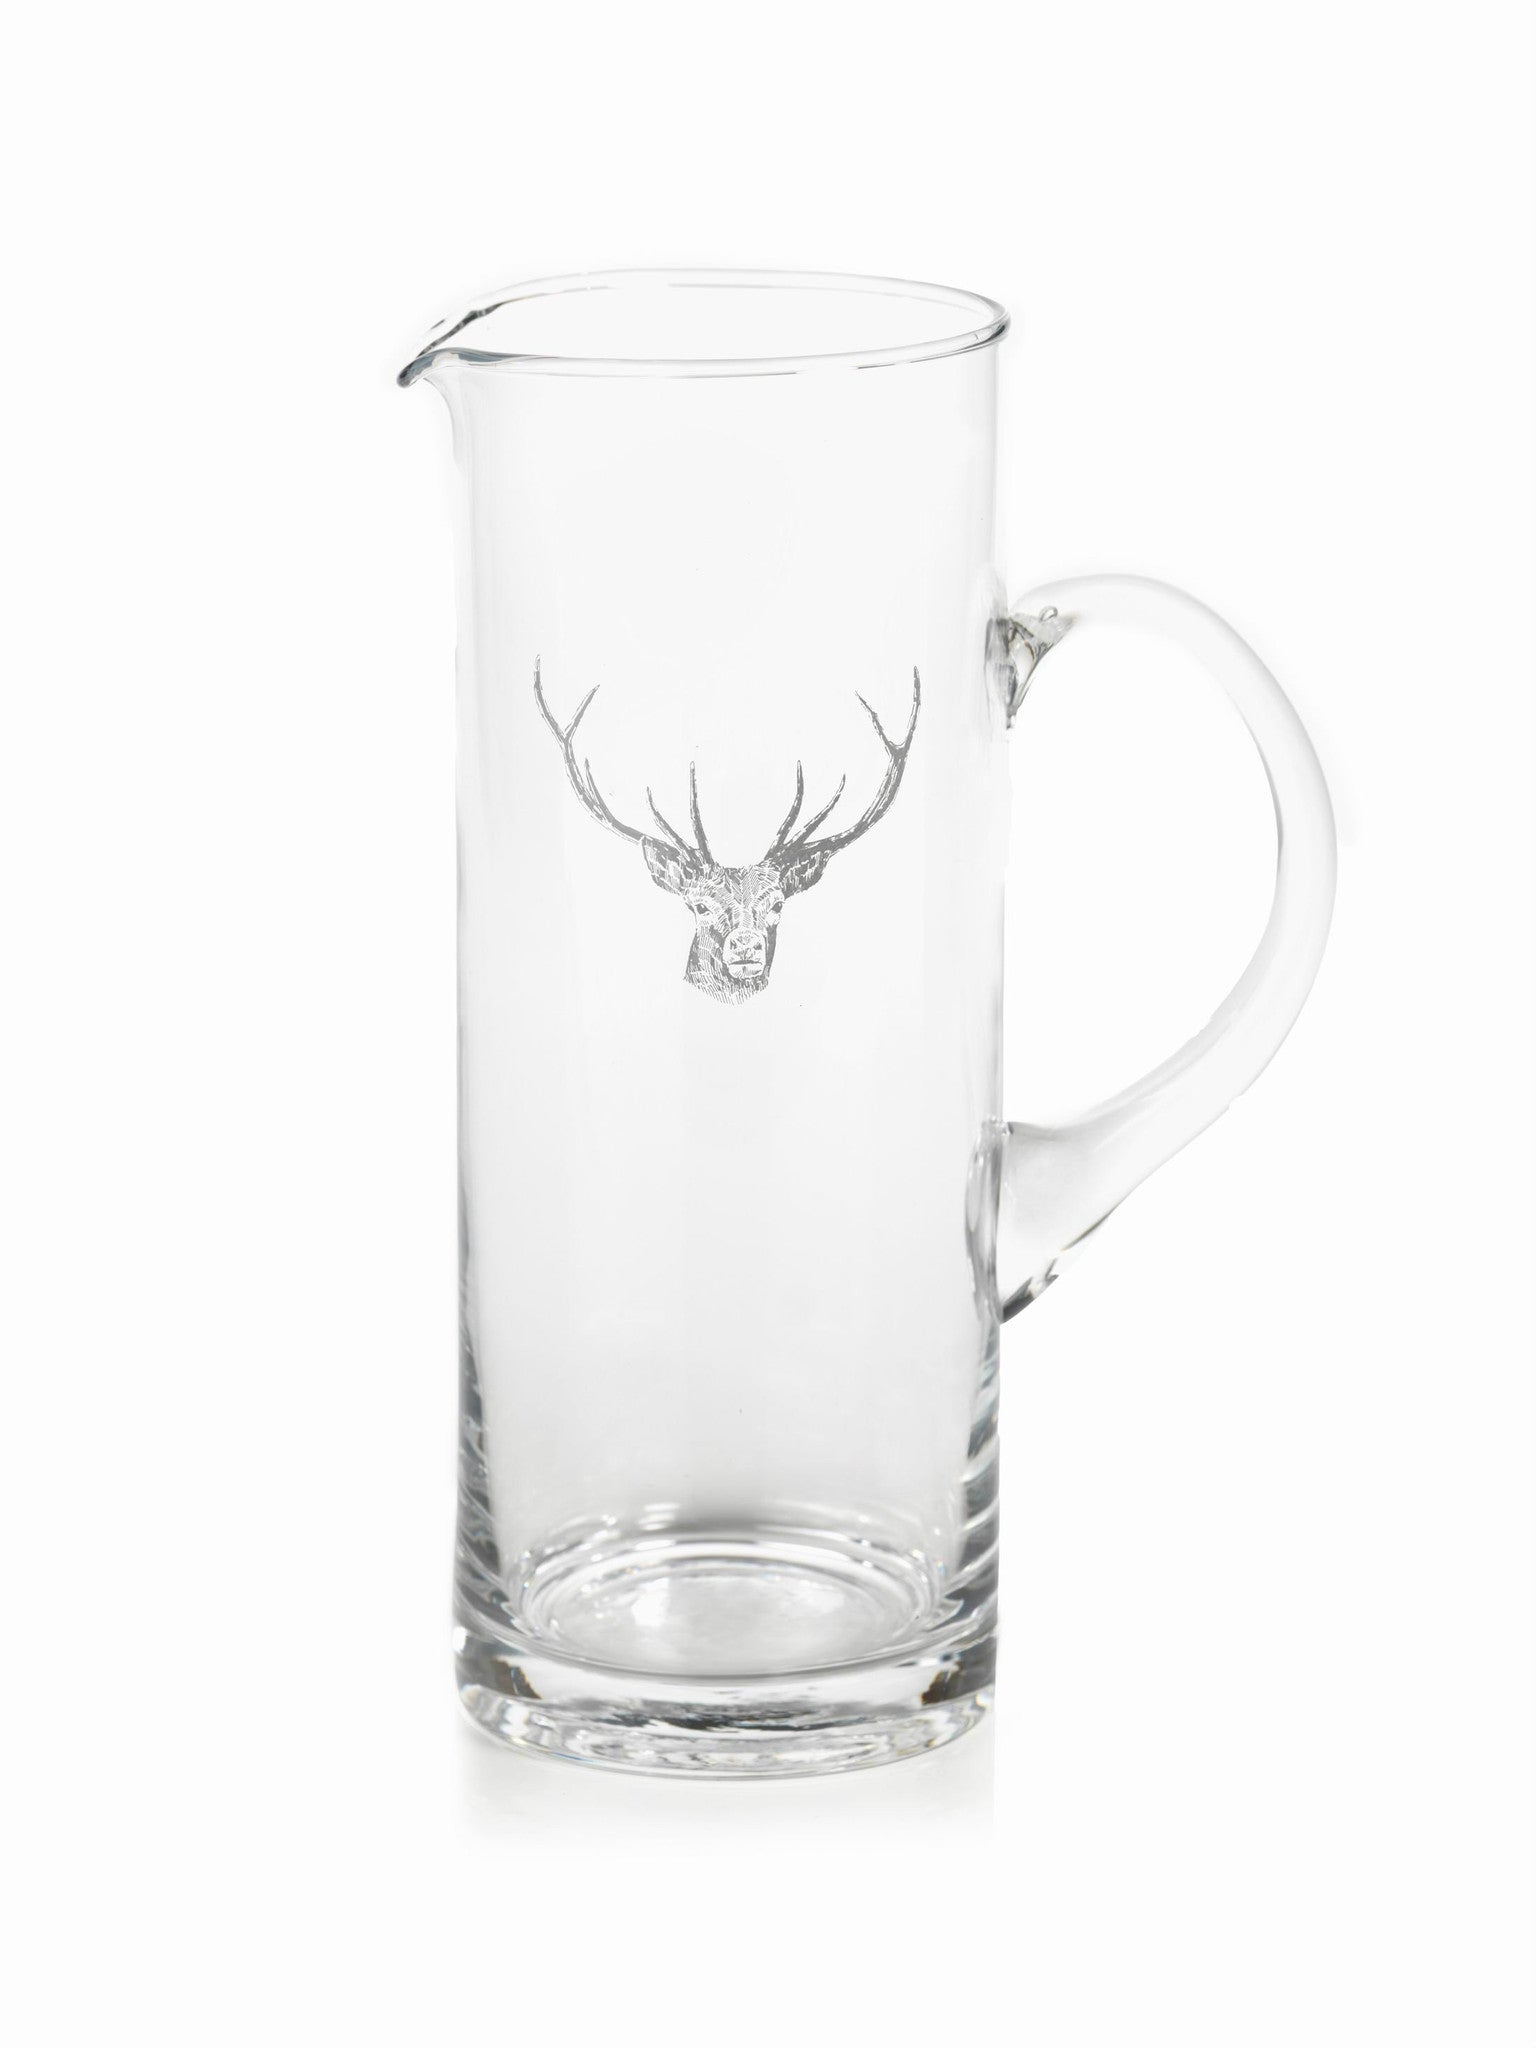 Stag Head Pitcher and Glassware - CARLYLE AVENUE